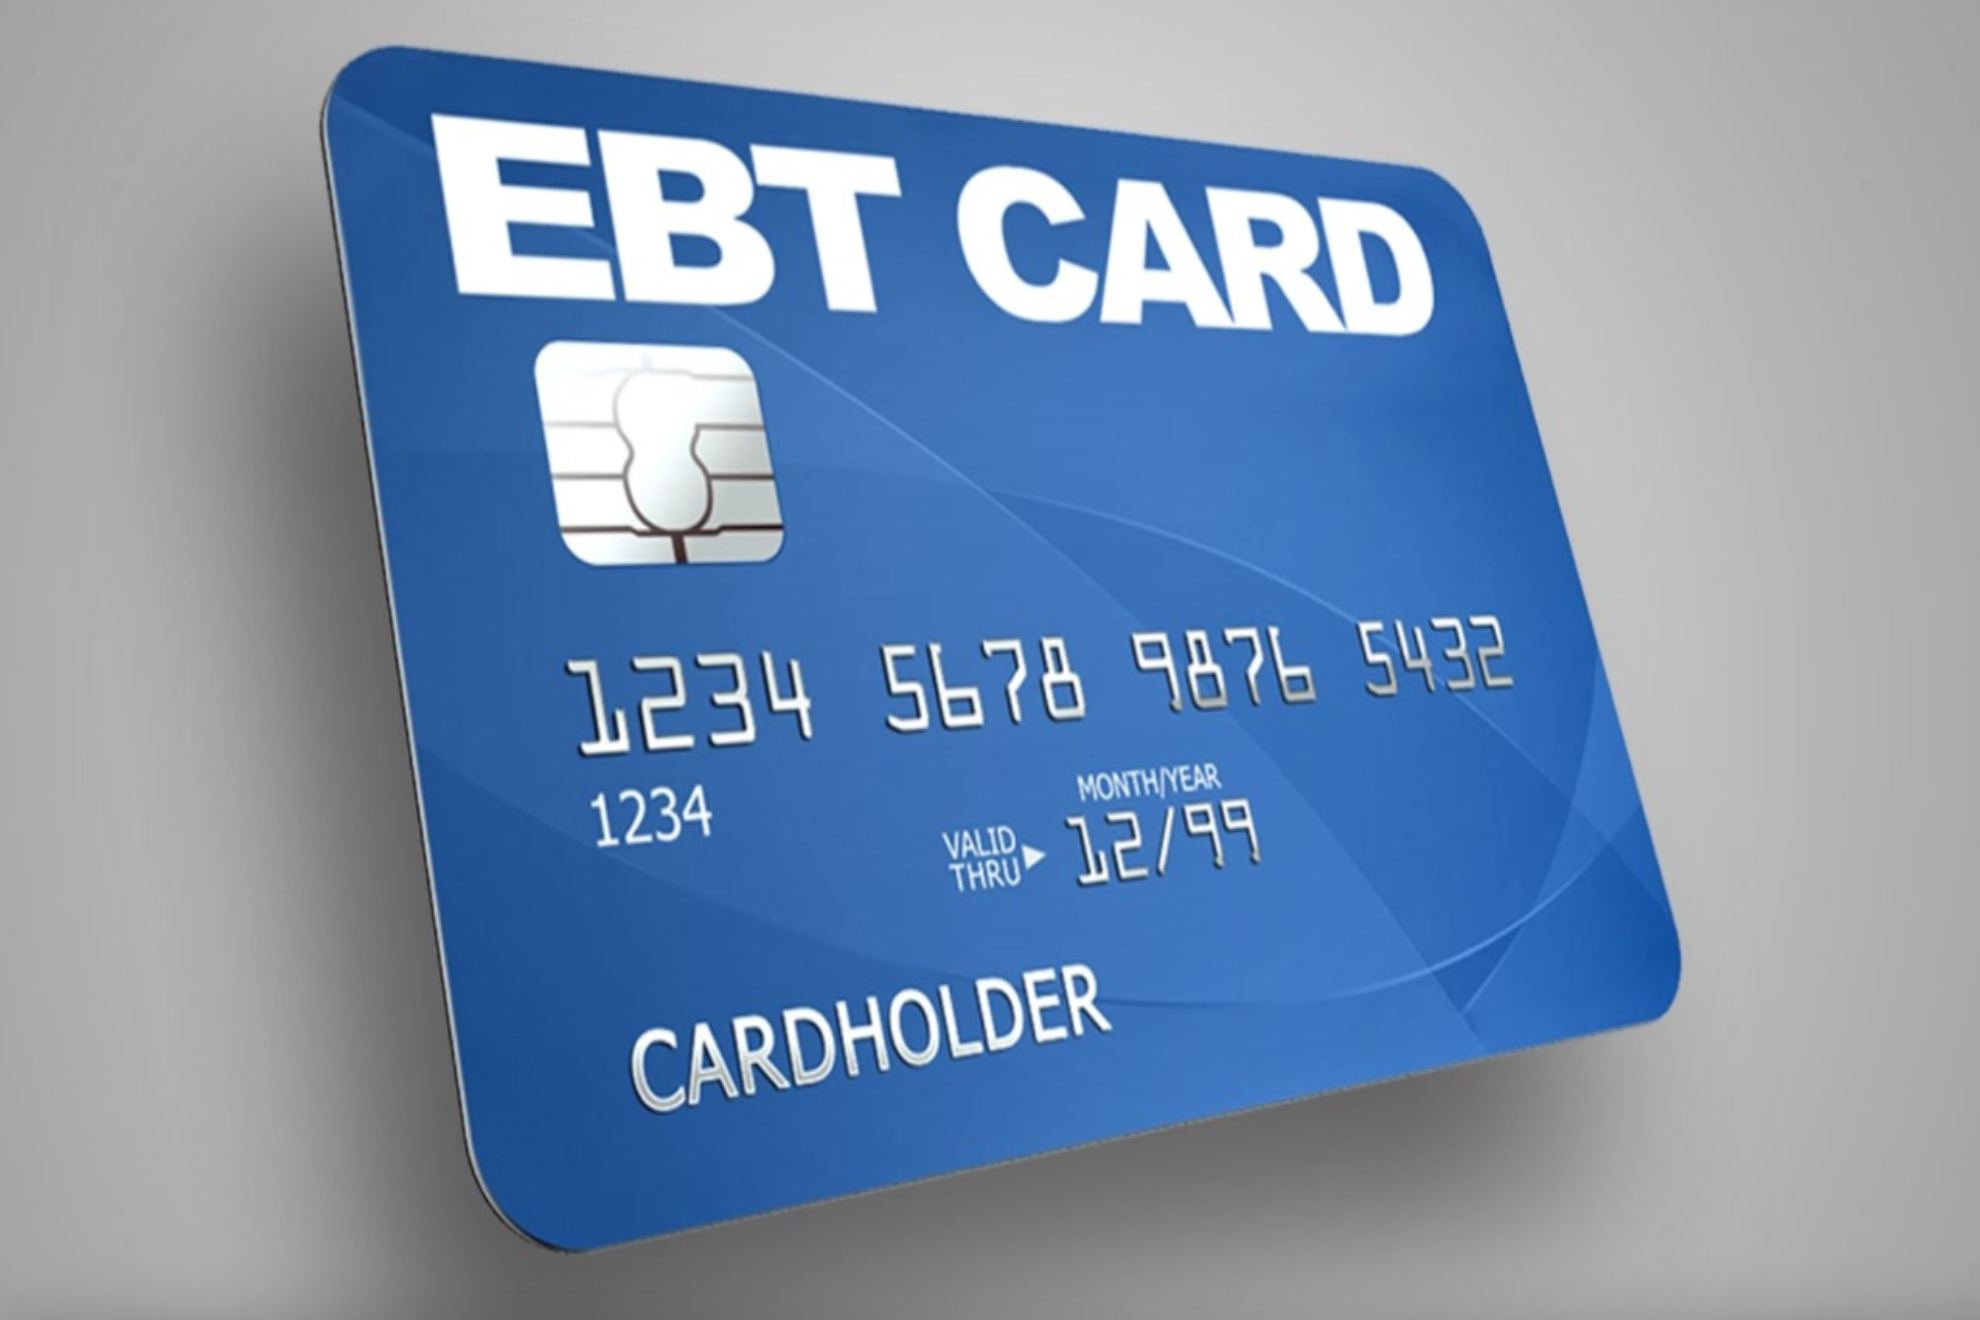 EBT Card Online: Where can you use your EBT Card Online?